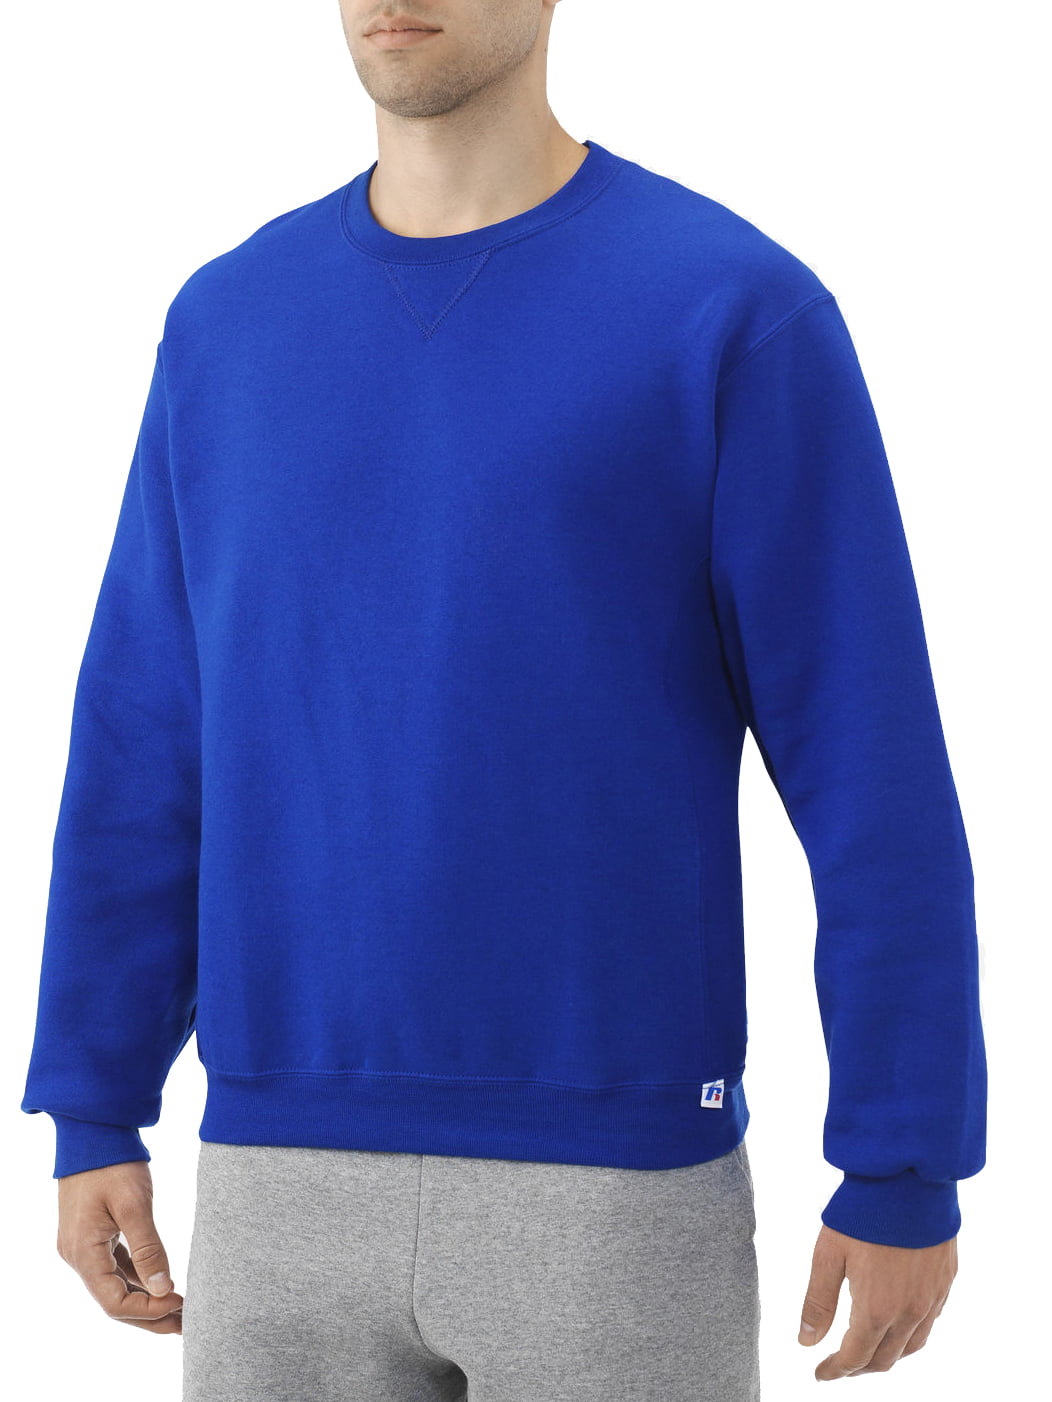 Russell Athletic mens Crewneck 